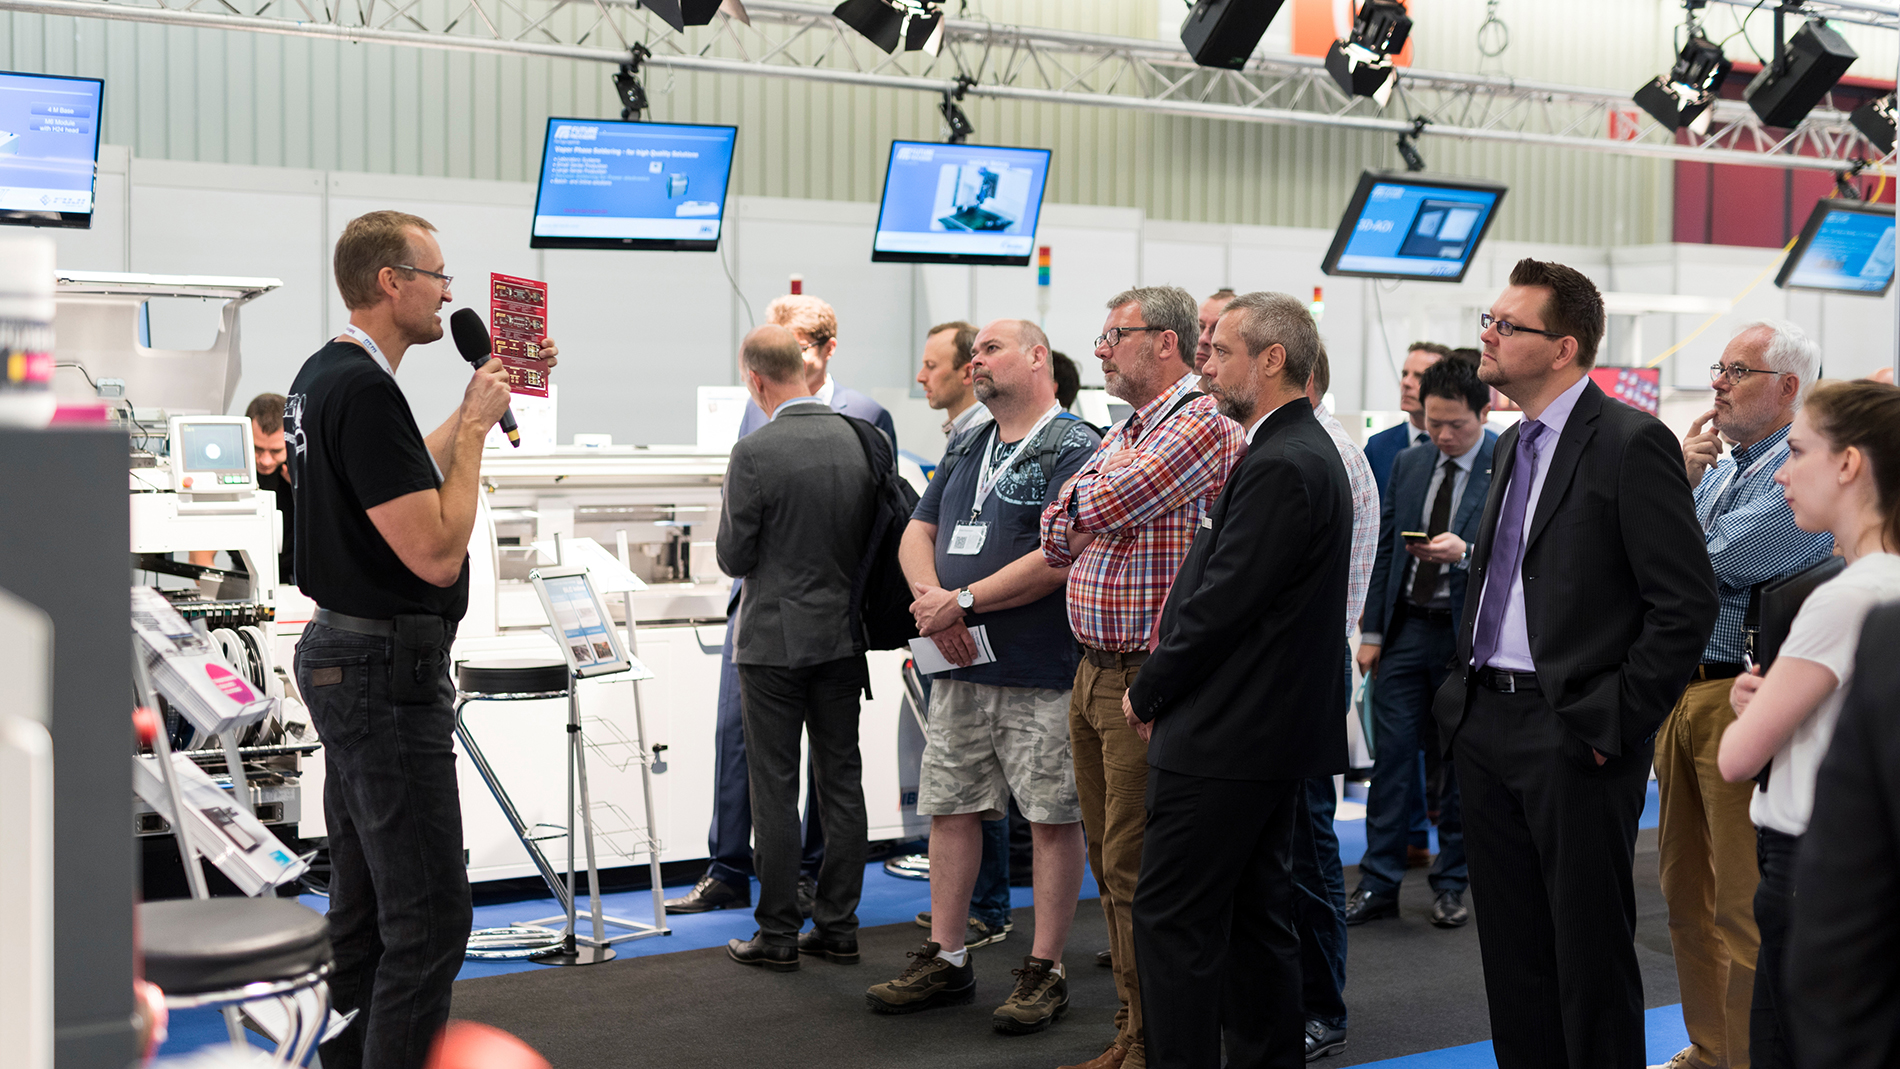 Guided tour at the production line "Future Packaging", organized by Fraunhofer IZM